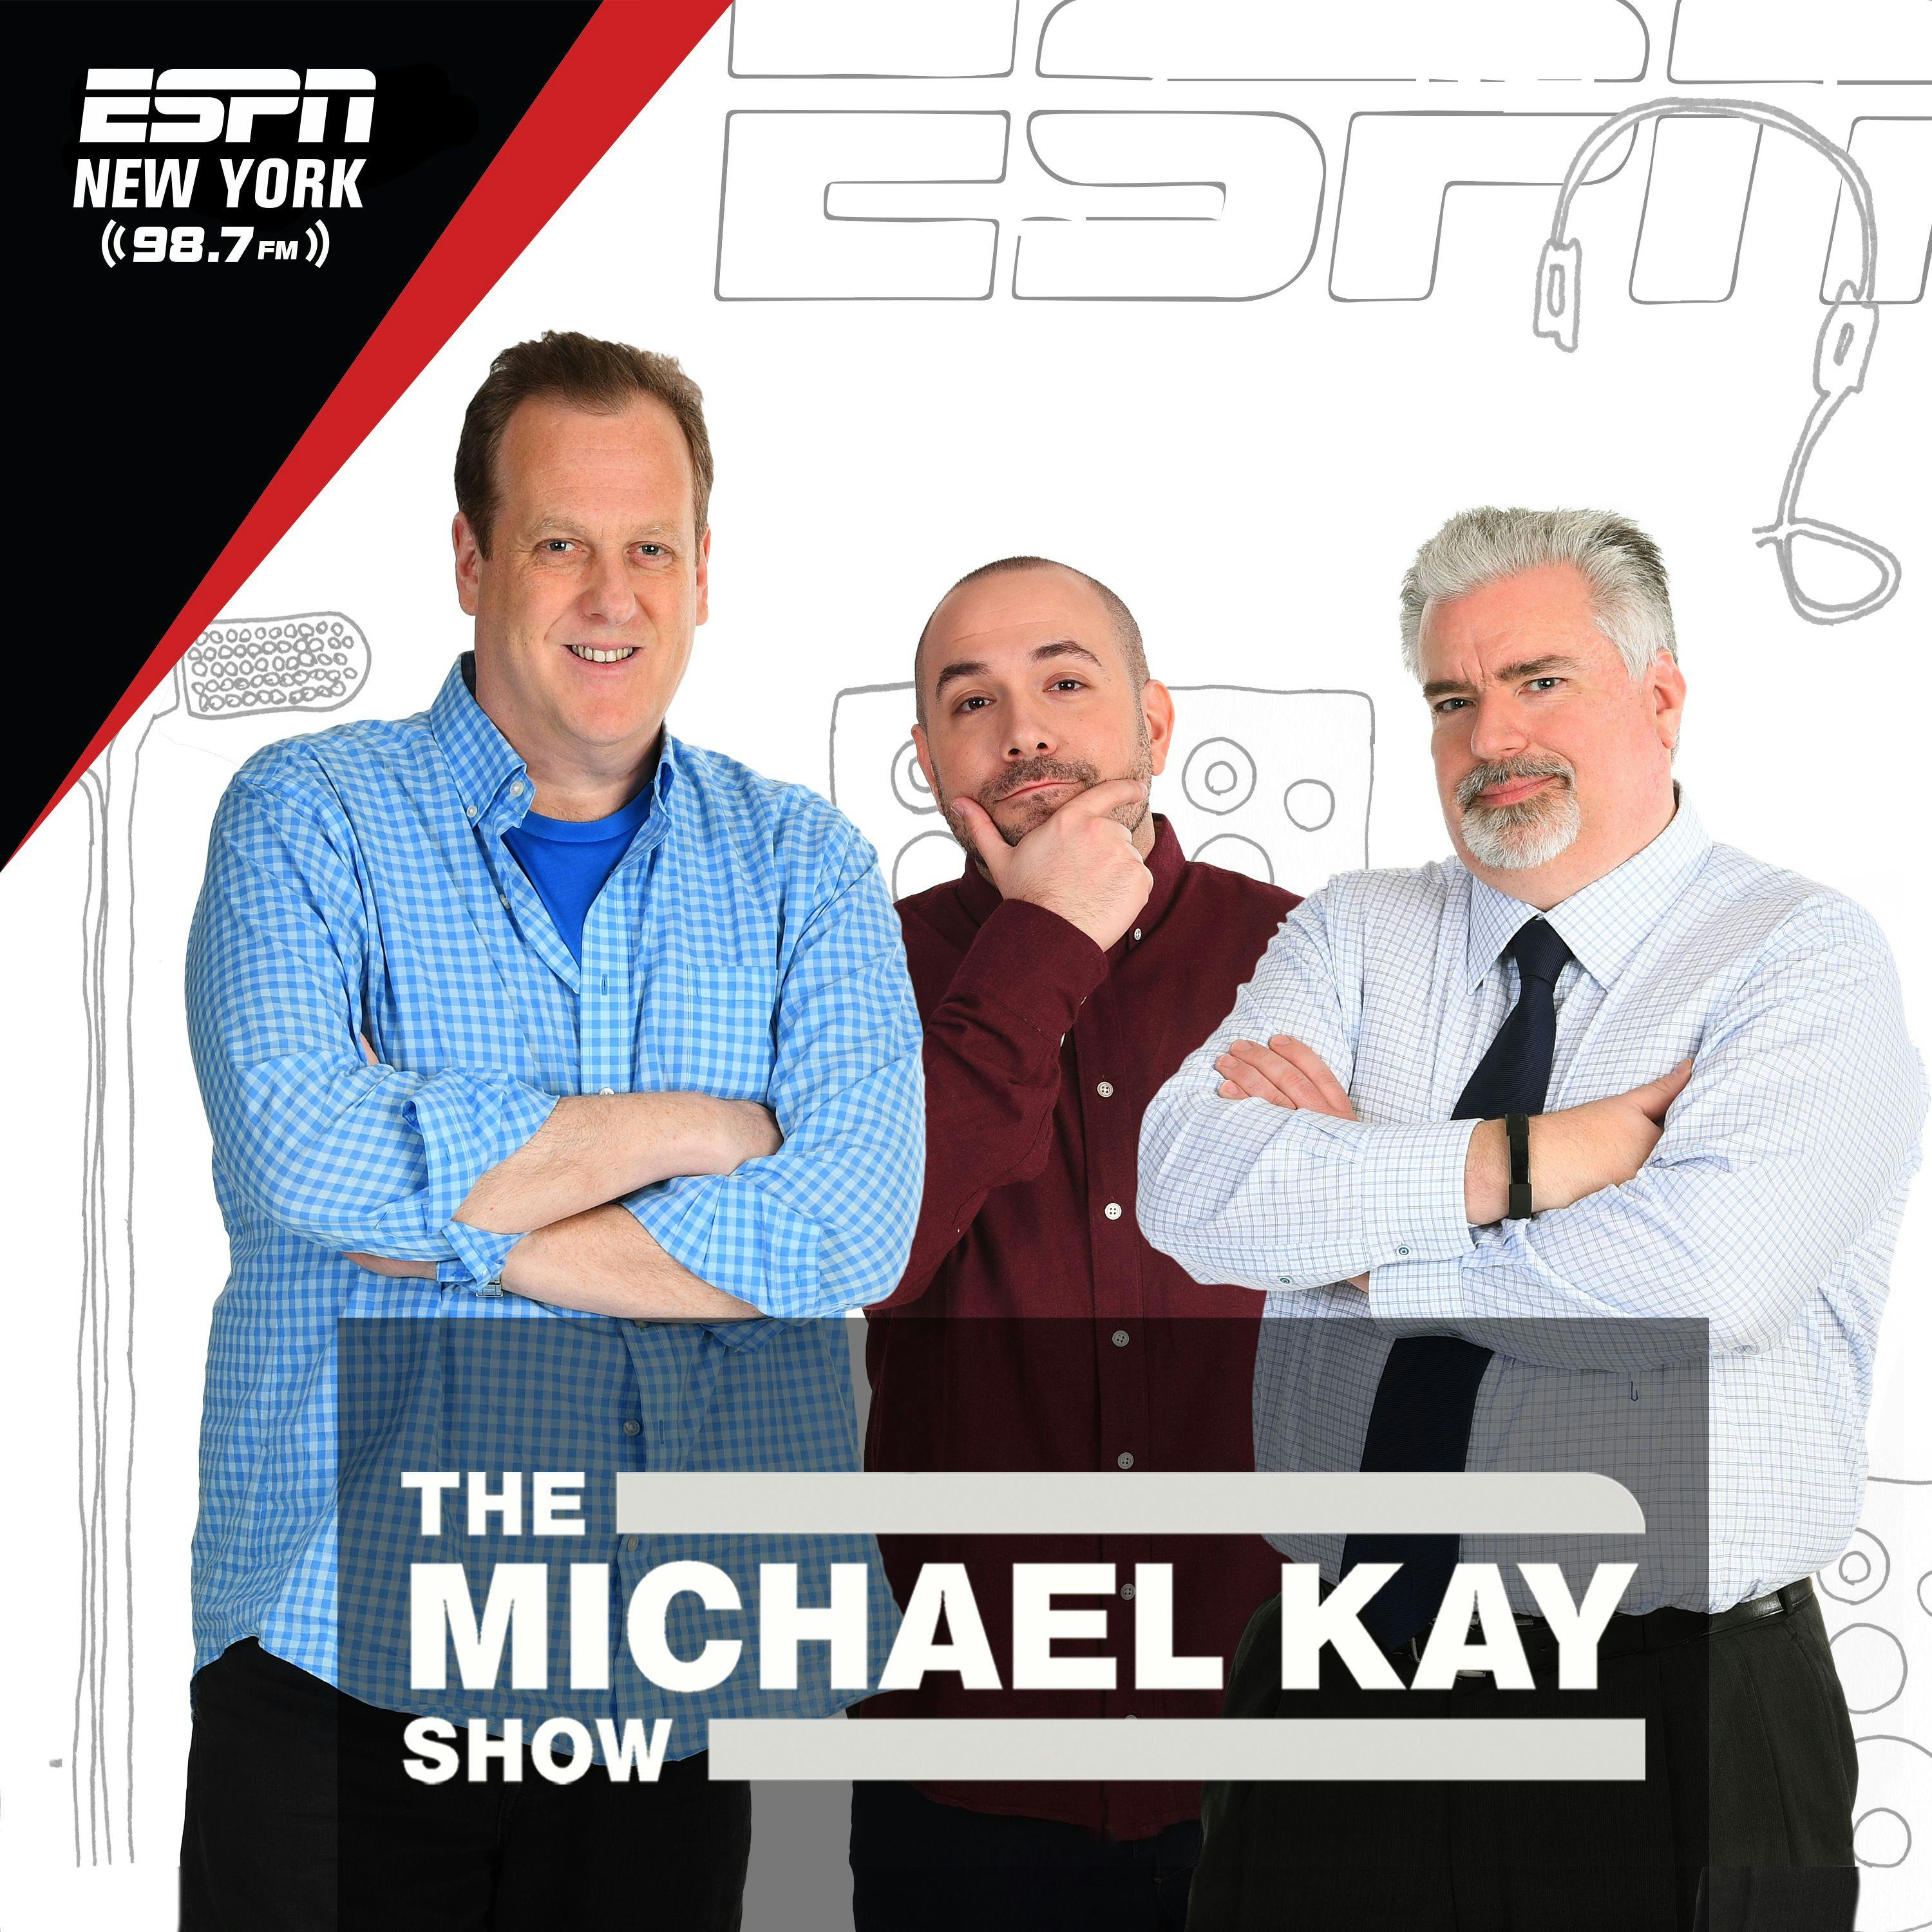 Podcasts like The Michael Kay Show